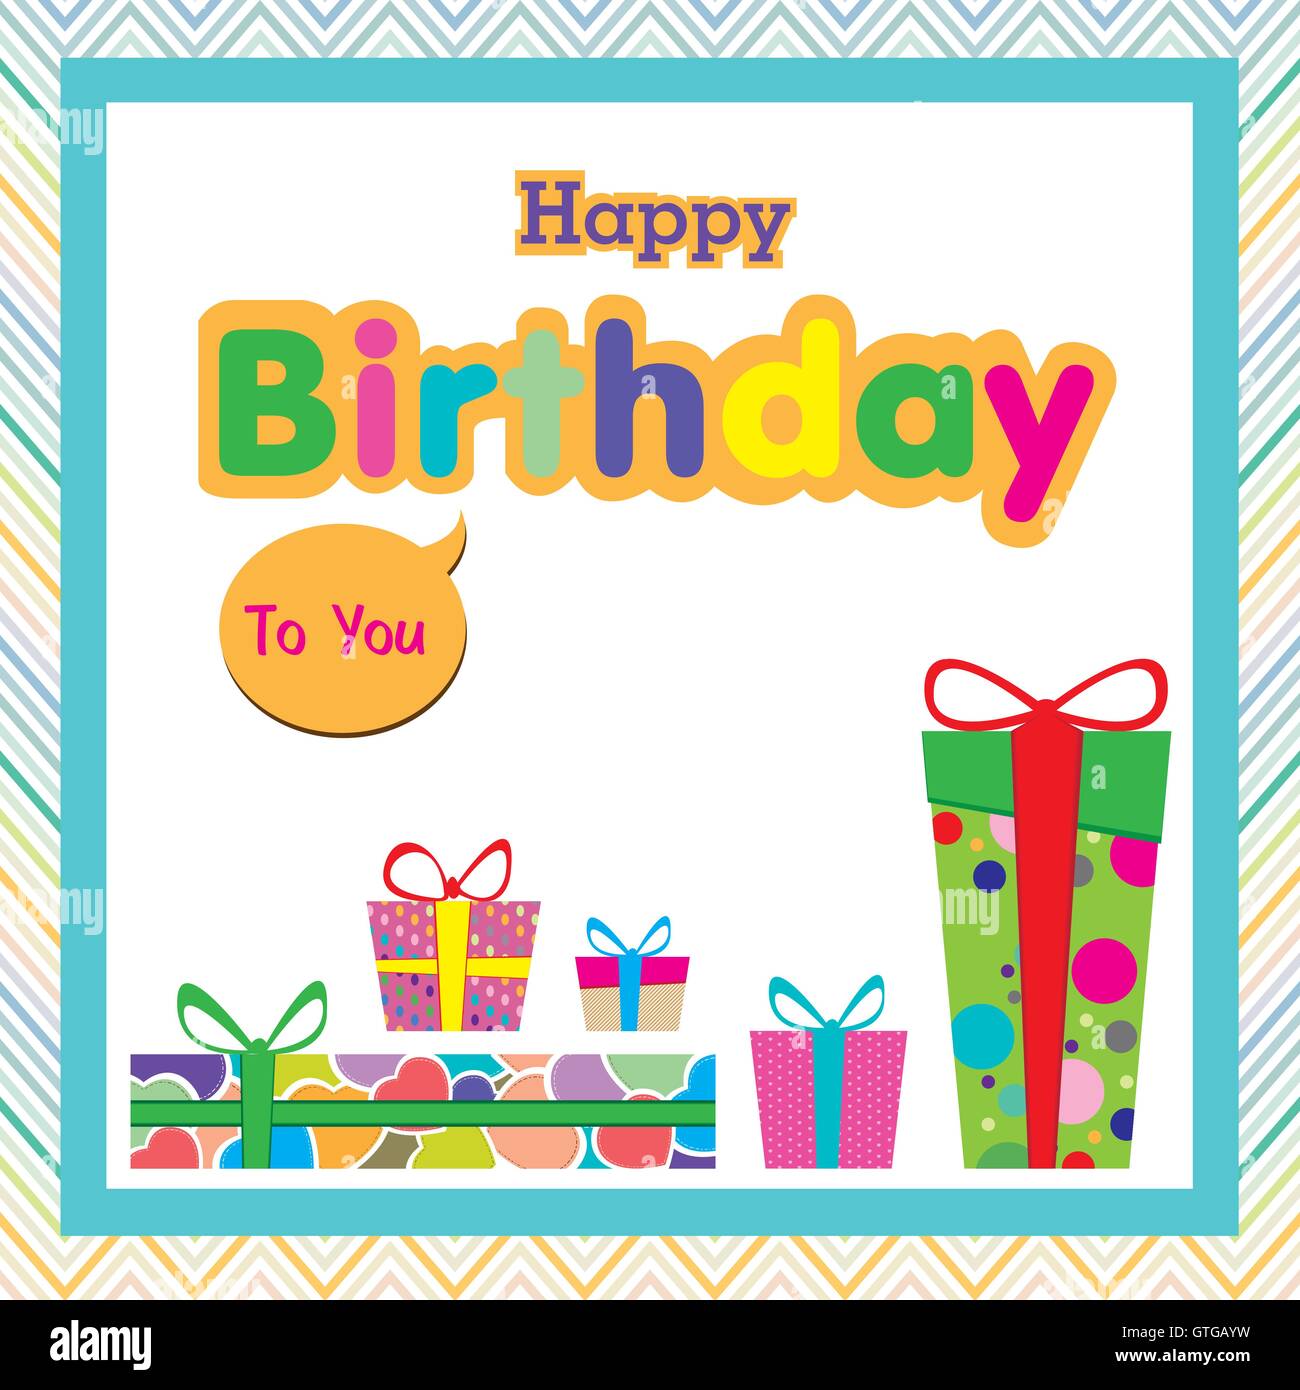 Birthday card design Stock Vector Images - Alamy